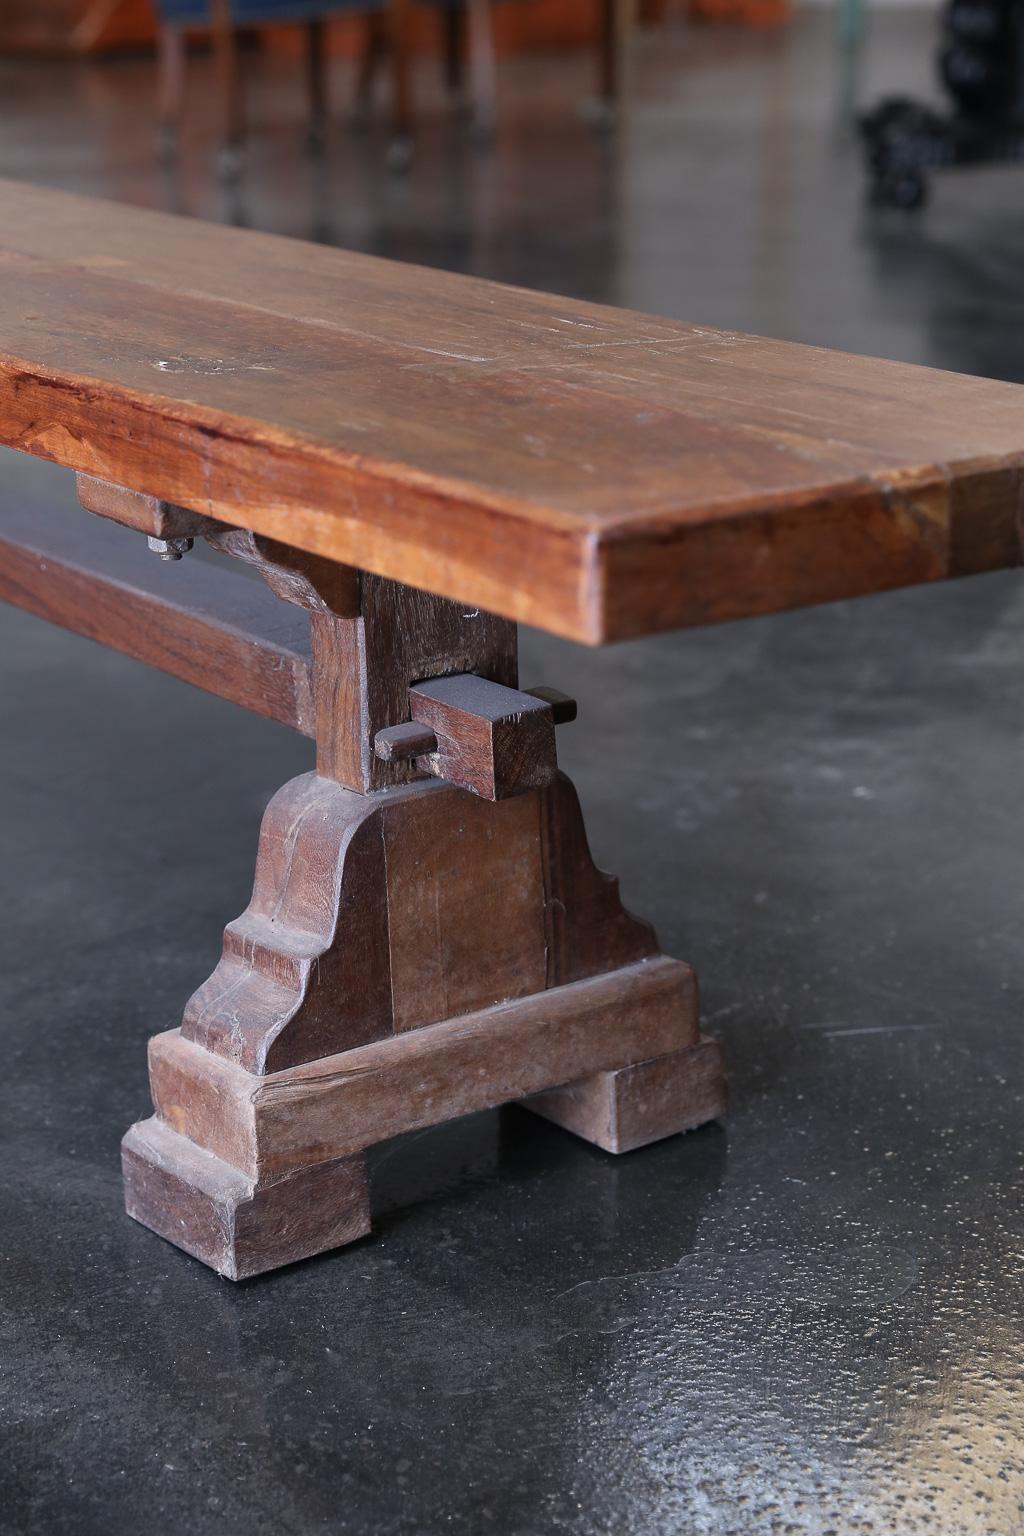 It is a flat bench with a solid thick top supported on two pedestals on either end. It is heavily built in the old world carpentry with immaculate butterfly joints. Benches like this one will last several generations. It stood the test of